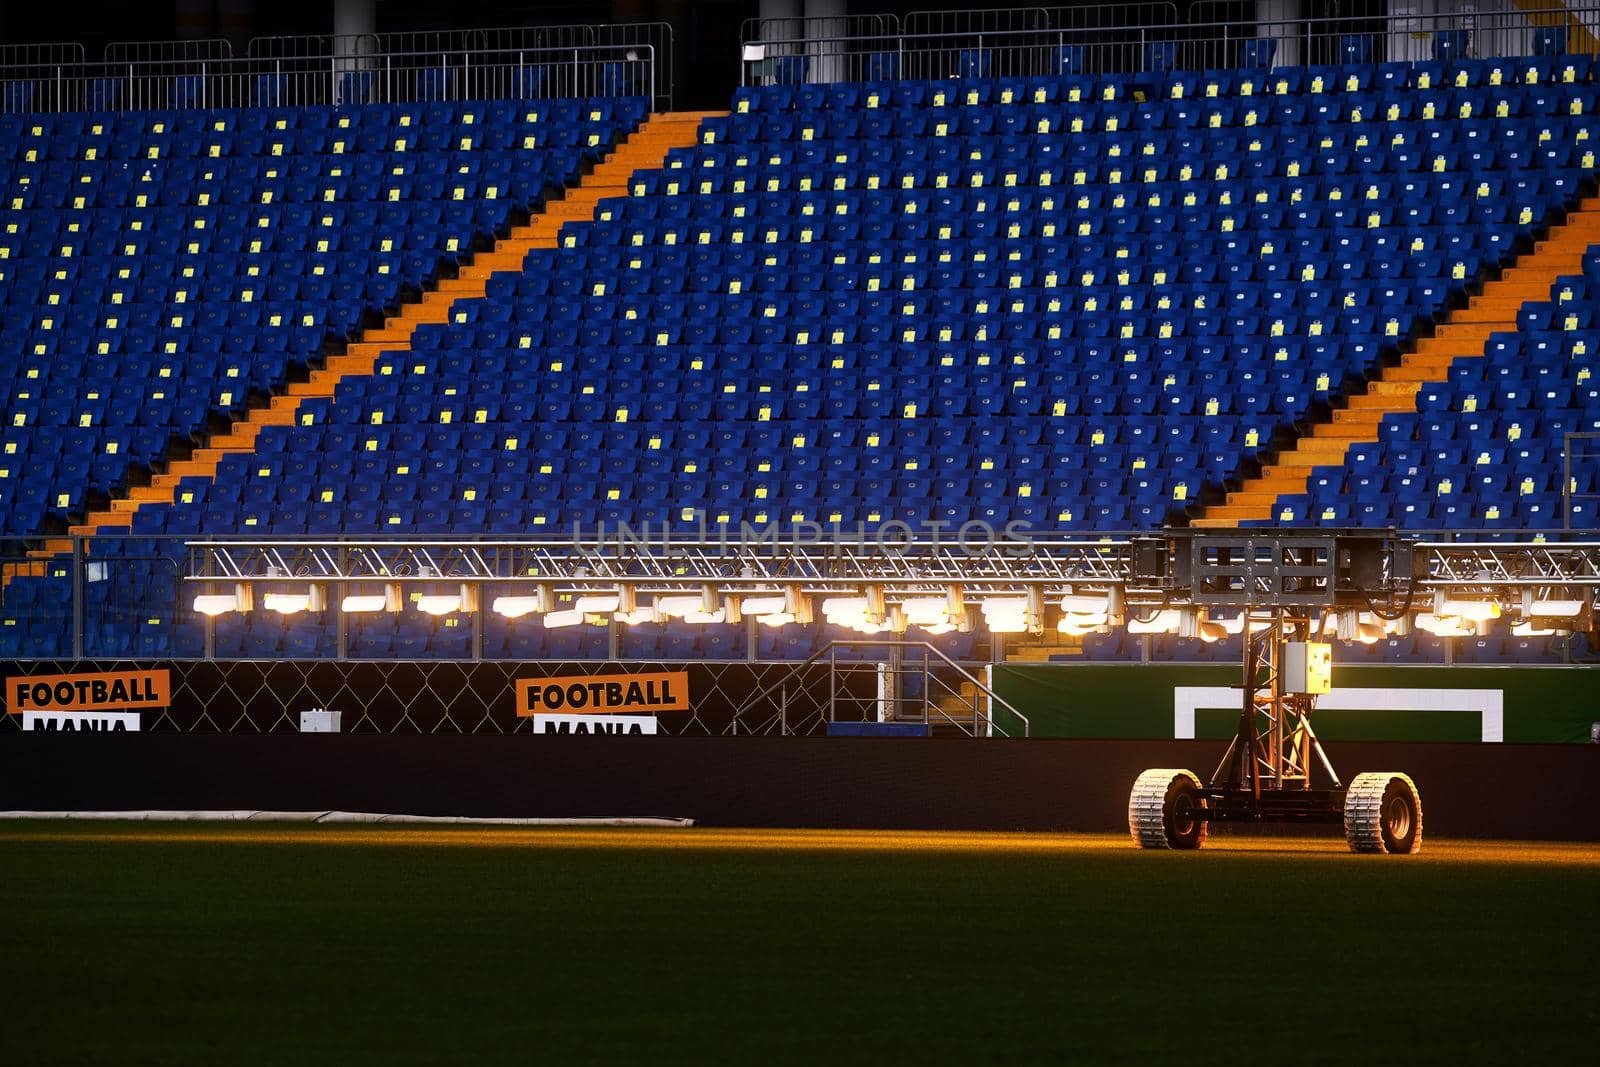 Artificial light system for growing football stadiums grass. Lamps to heat the lawn of the stadium and keep the grass in perfect condition. Lamps for football lawn by EvgeniyQW